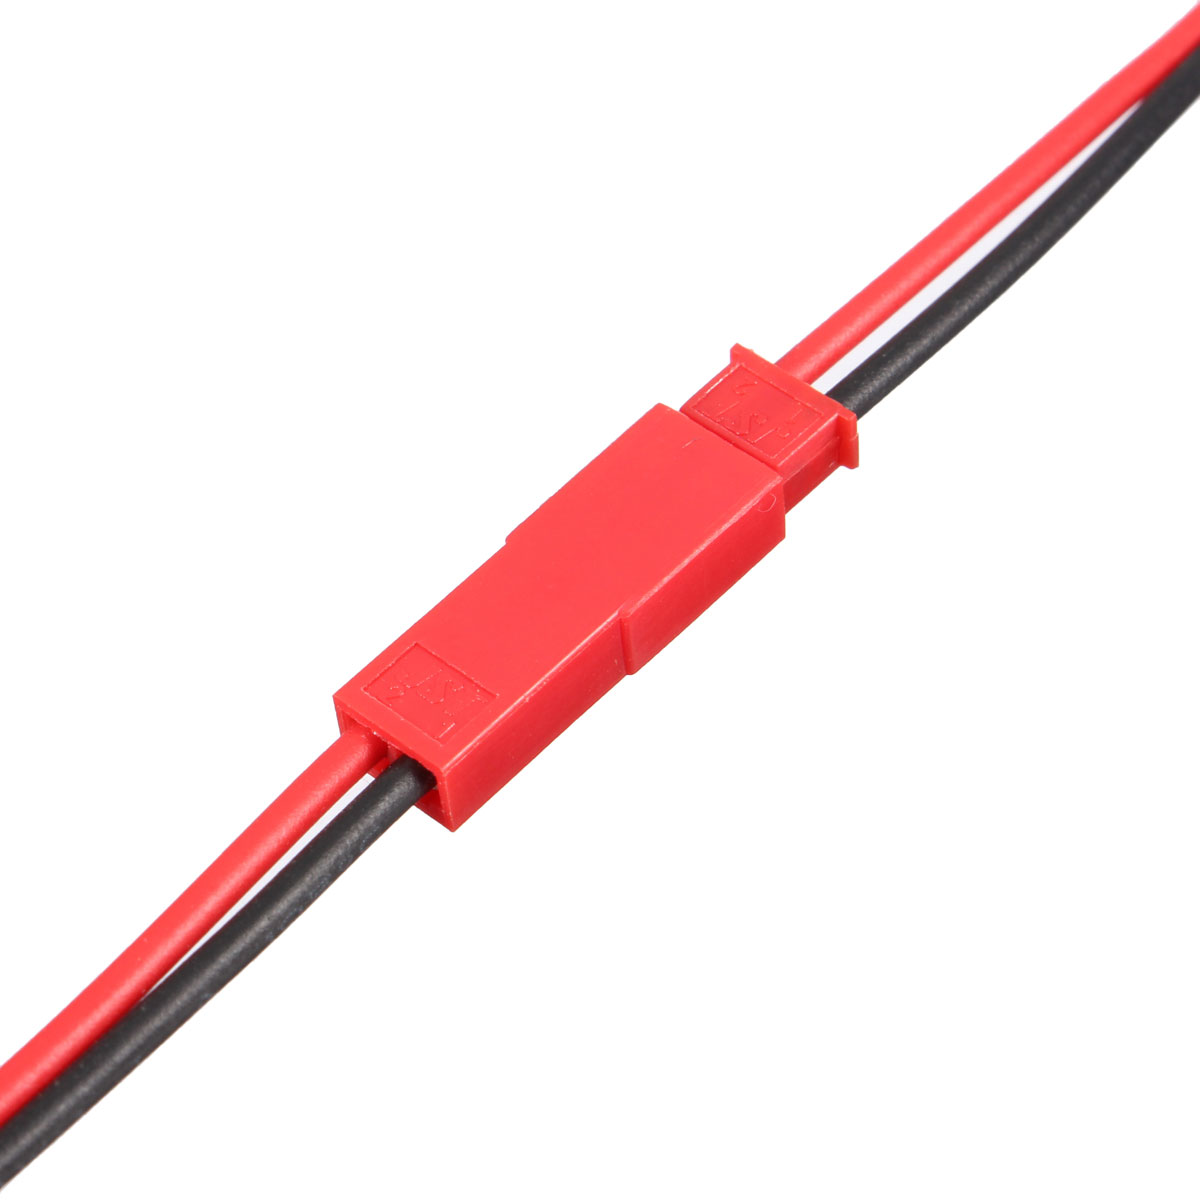 Excellwayreg-10-Pairs-2-Pins-JST-Male--Female-Connectors-Plug-Cable-Wire-Line-110mm-Red-1268119-8